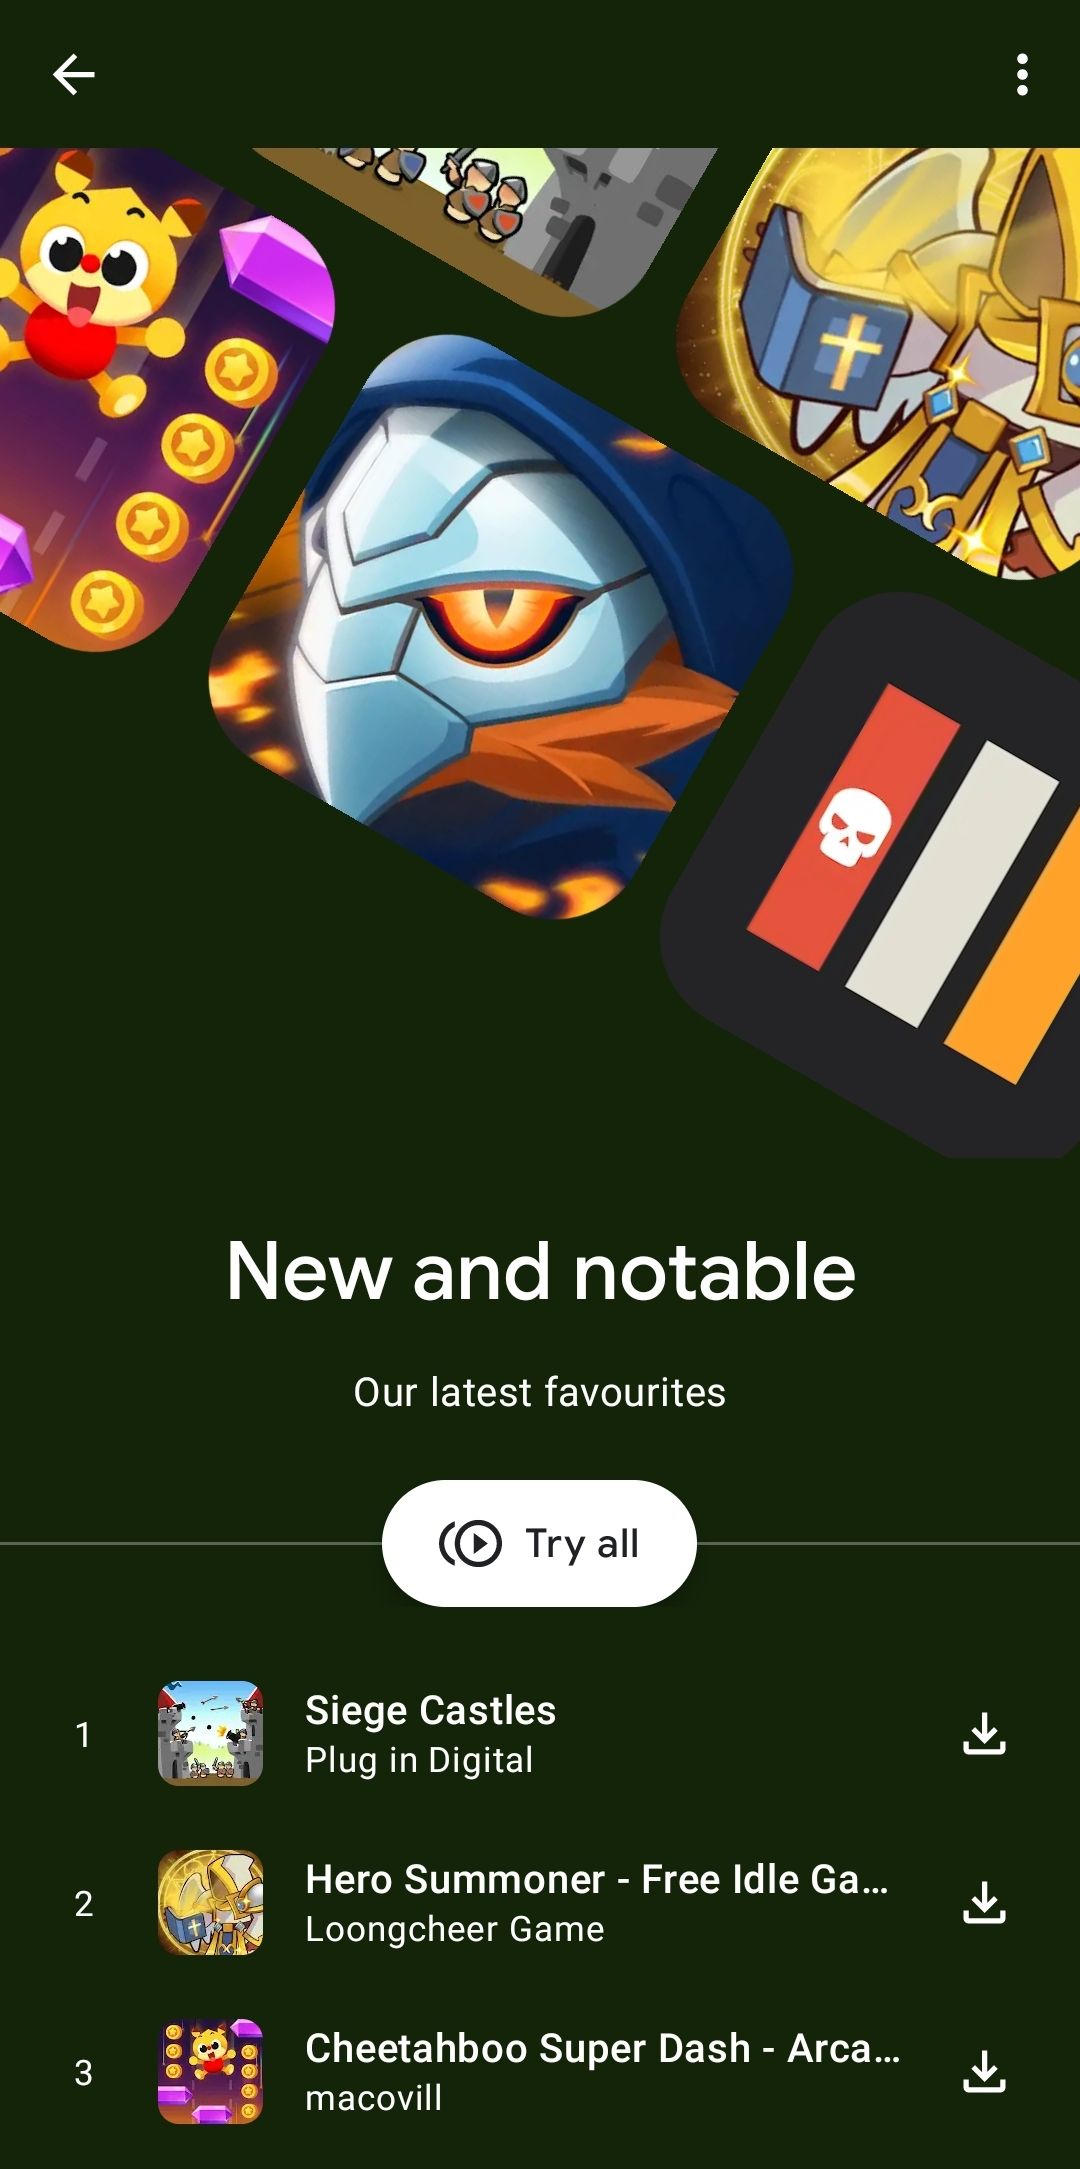 Google Play Games creates playlists of games to try back-to-back